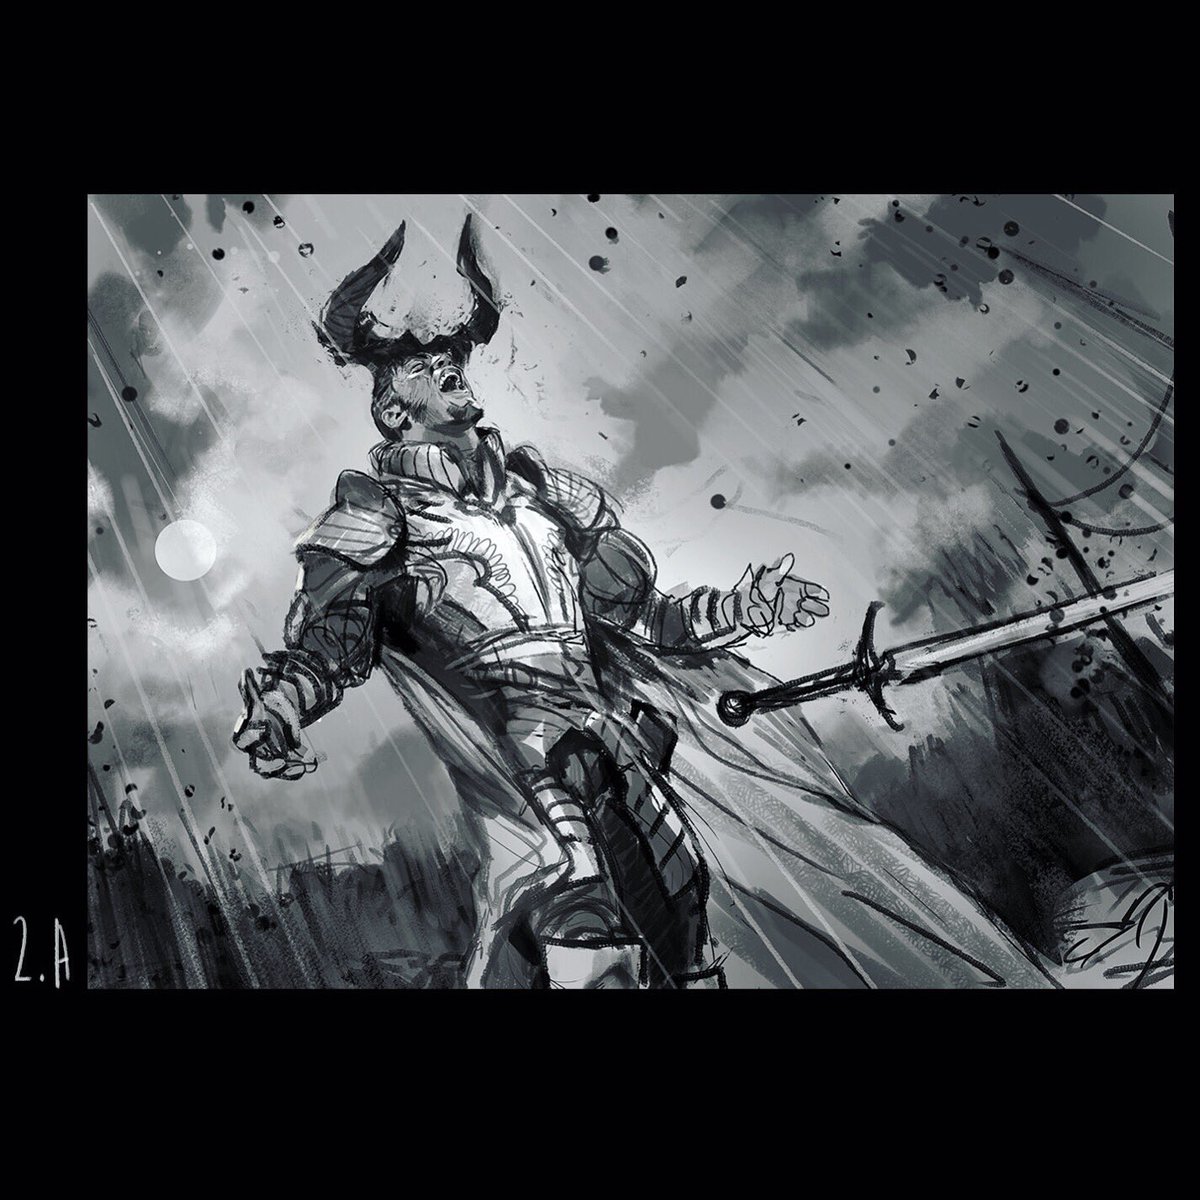 seems lots of folks like to see the roughs! here's another one I would have loved to paint! another comp mtg sketch 